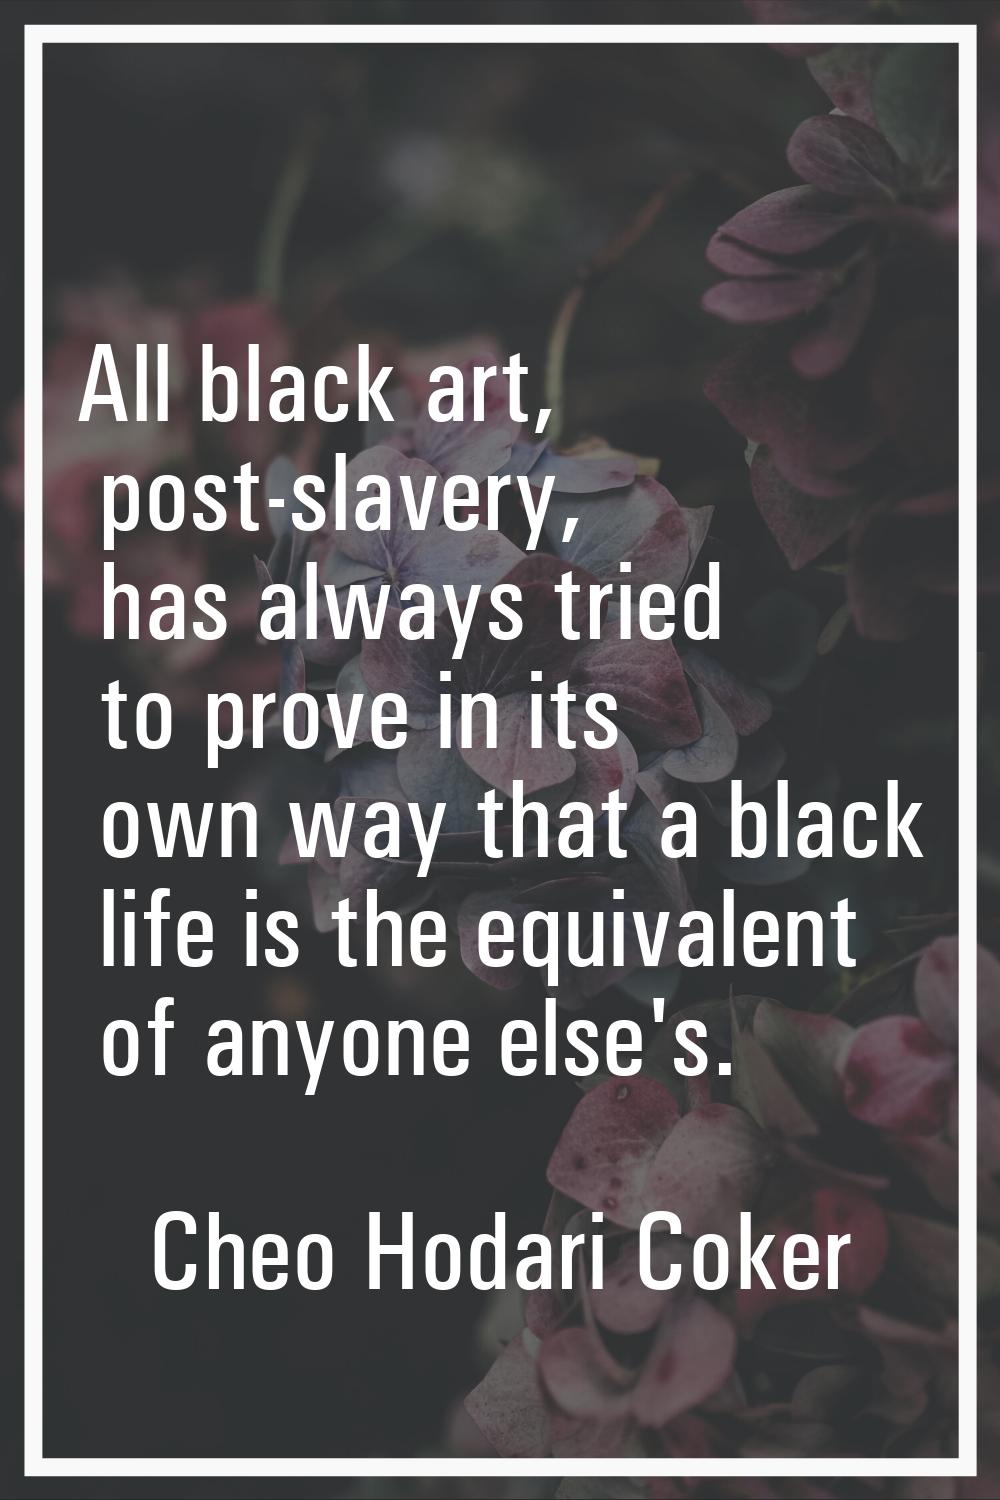 All black art, post-slavery, has always tried to prove in its own way that a black life is the equi